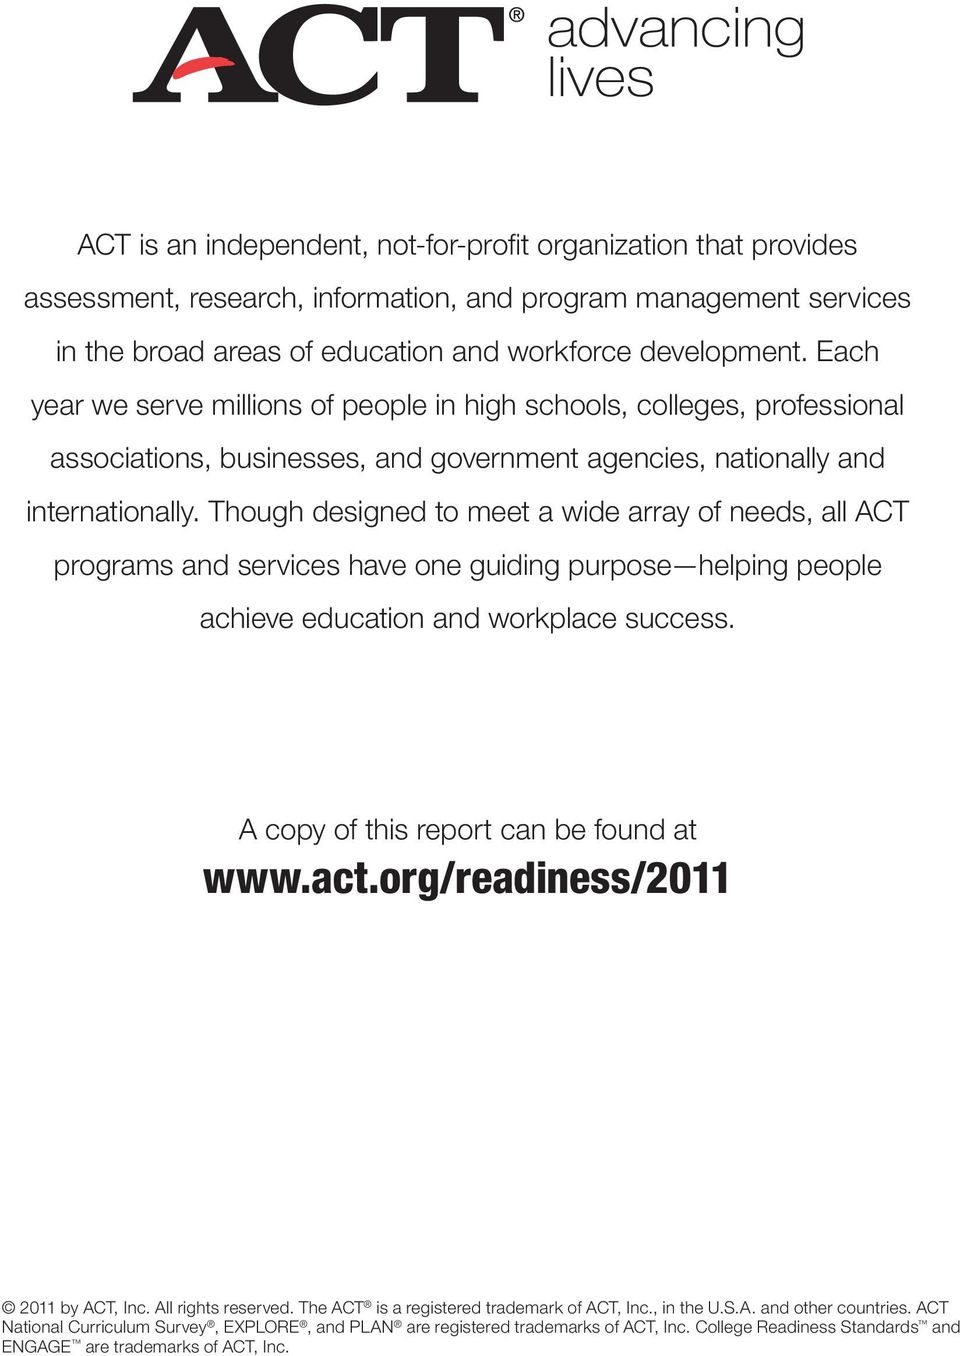 Though designed to meet a wide array of needs, all ACT programs and services have one guiding purpose helping people achieve education and workplace success. A copy of this report can be found at www.